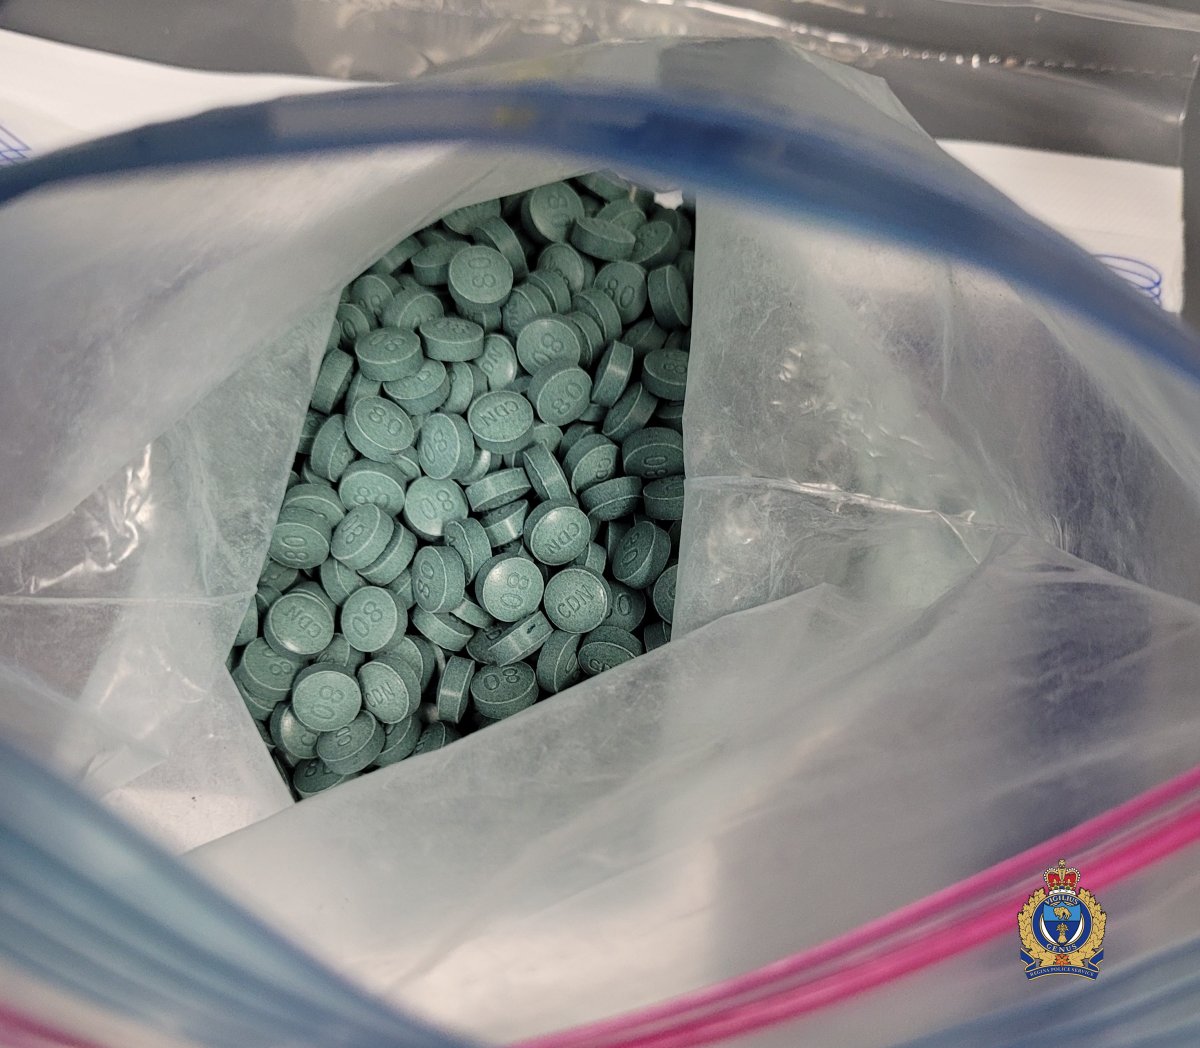 Three charged in Saskatoon after search warrant turns up illicit drugs - image